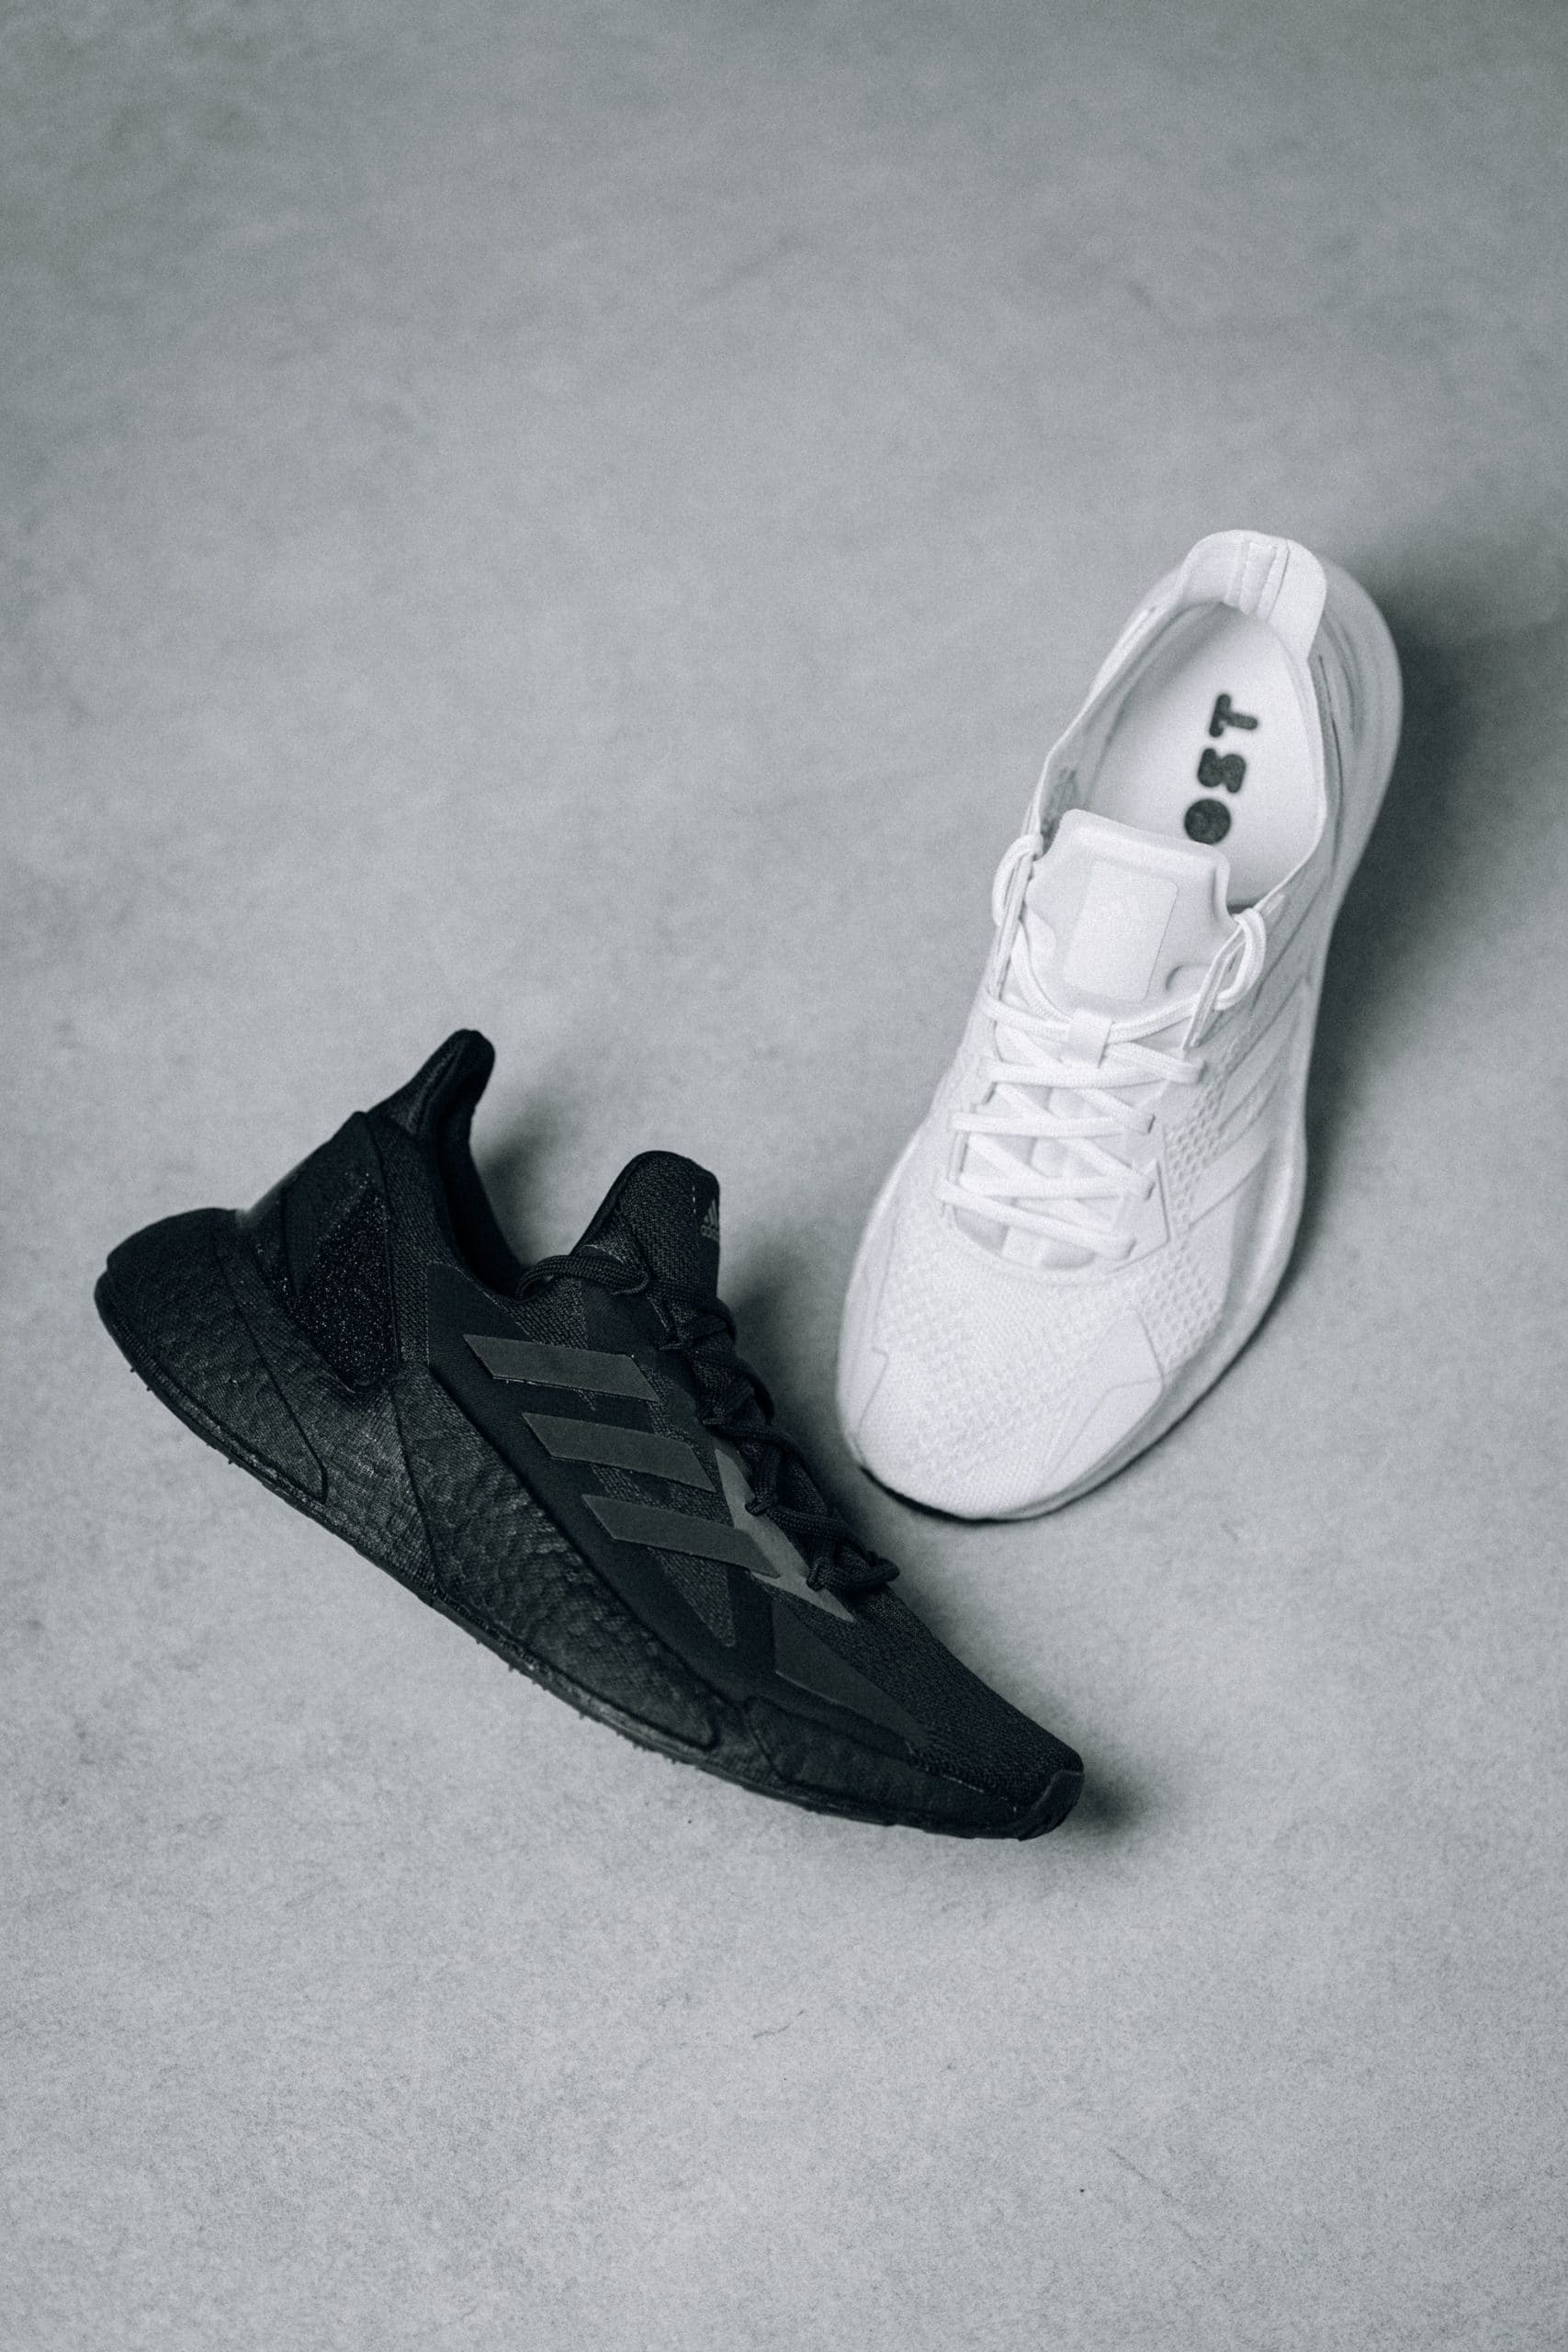 Adidas X9000s Arrive In Australia Exclusively At Platypus Shoes - Boss ...